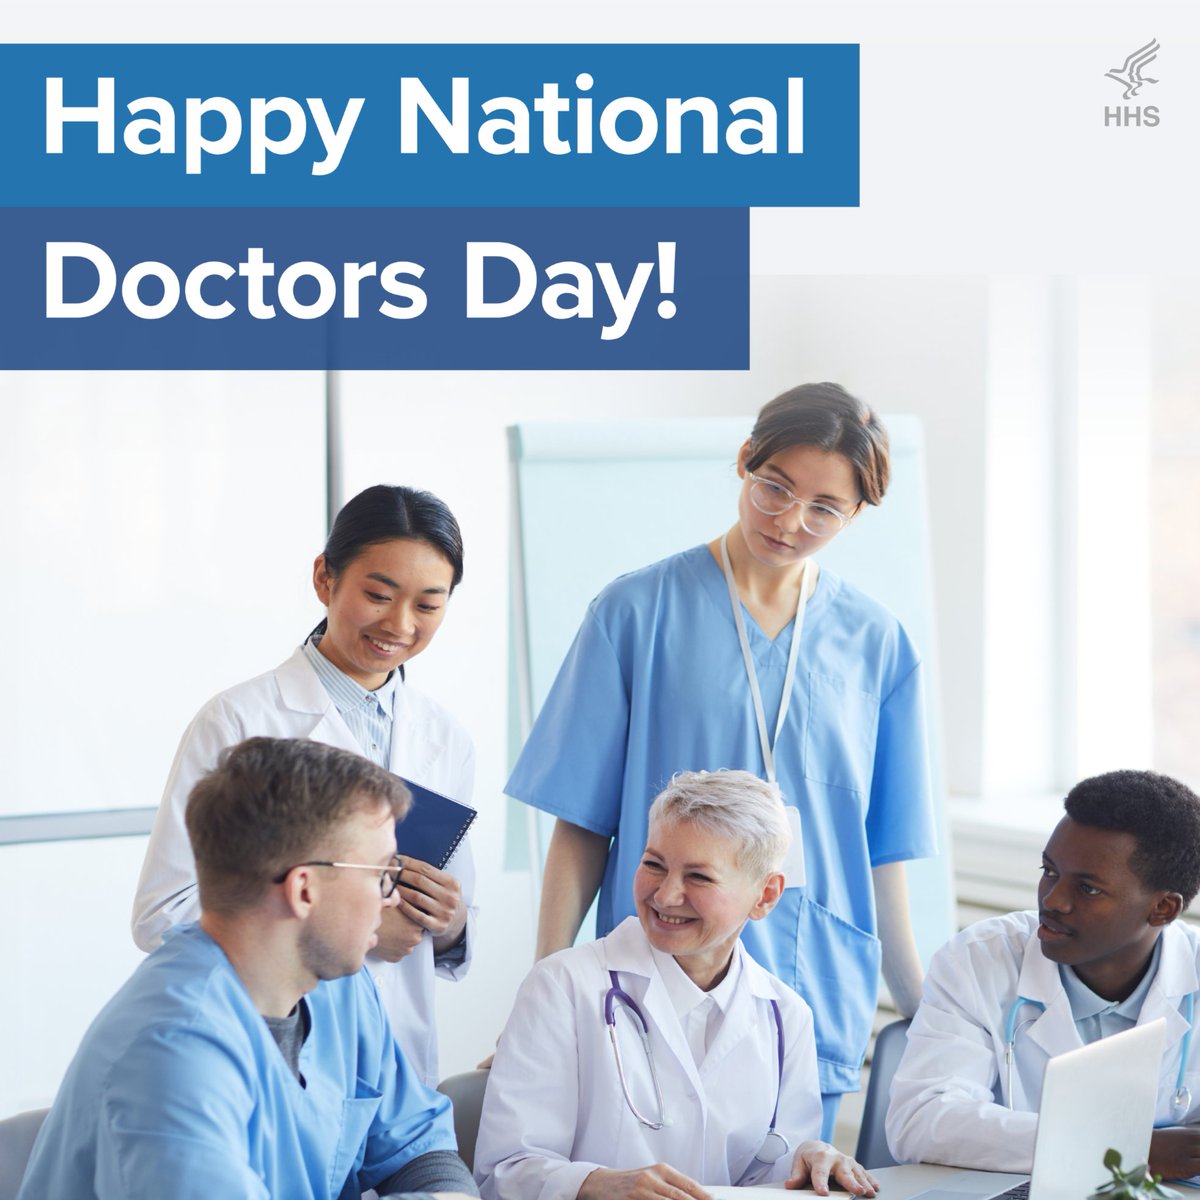 Happy National Doctors Day! Today, we celebrate the incredible contributions of doctors across the country. Thank you for your commitment to your patients and dedication to healing and saving lives.